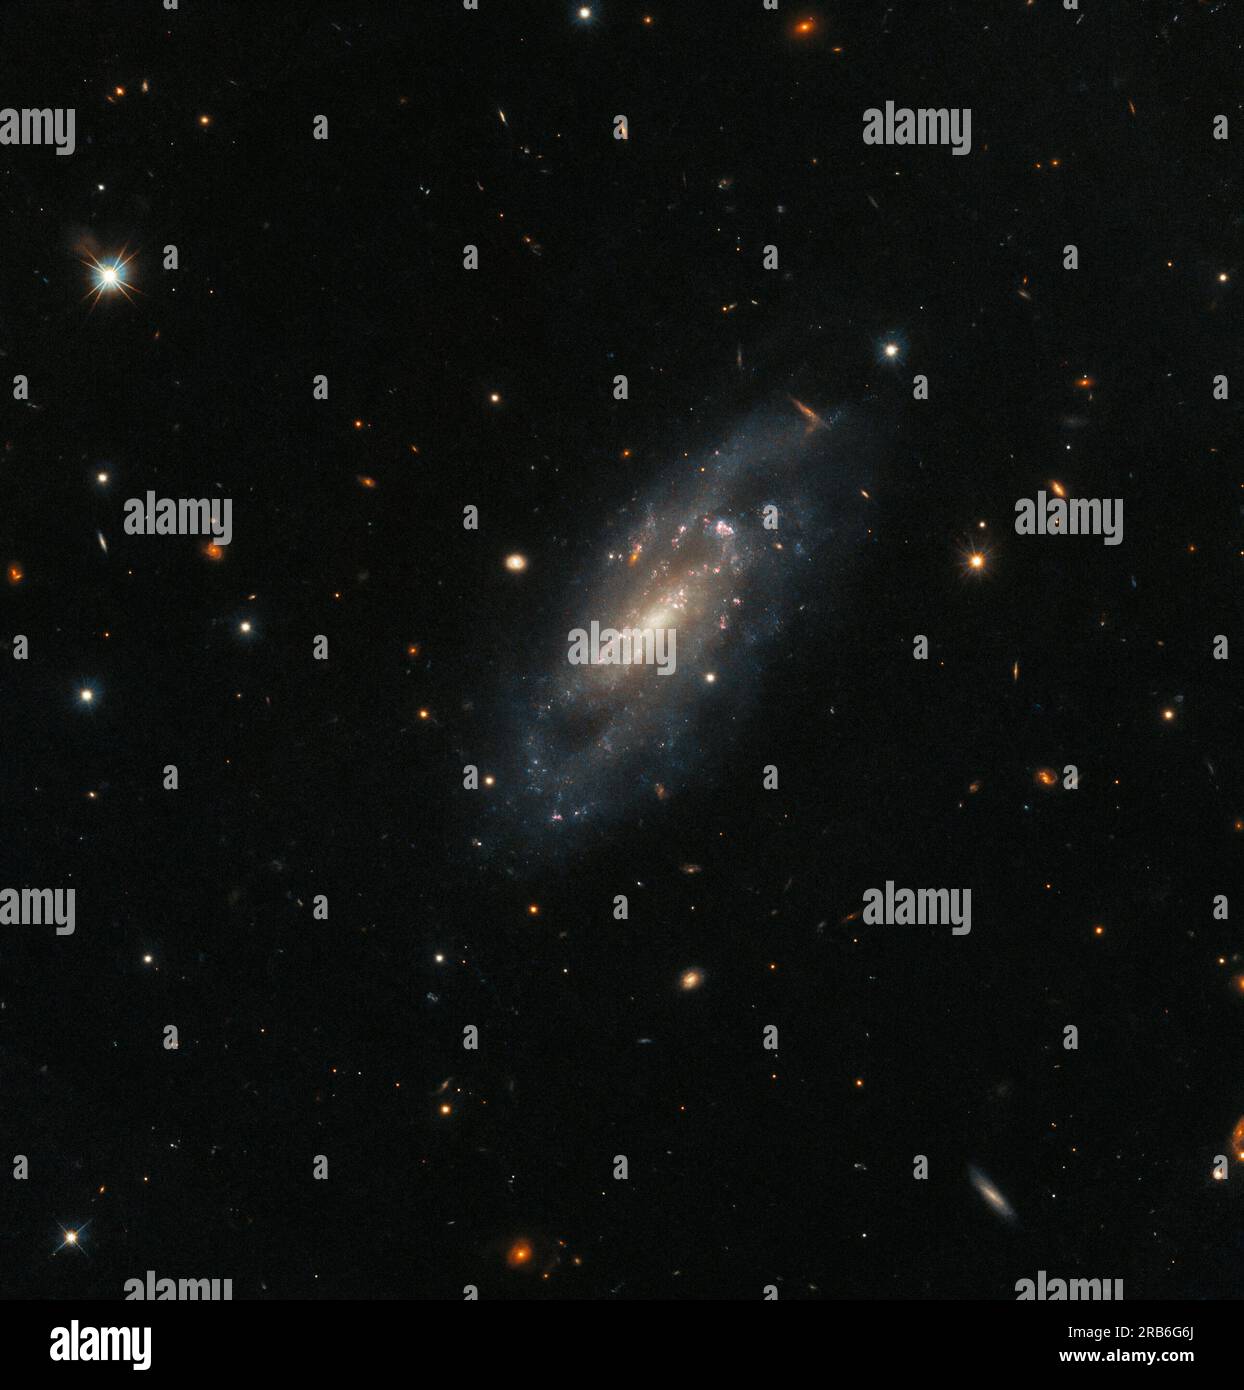 The spiral galaxy UGC 11860 seems to float serenely against a field of background galaxies in this image from the NASA/ESA Hubble Space Telescope. UGC 11860 lies around 184 million light-years away in the constellation Pegasus, and its untroubled appearance is deceiving; this galaxy recently played host to an almost unimaginably energetic stellar explosion. A supernova explosion  the catastrophically violent end of a massive stars life  was detected in UGC 11860 in 2014 by a robotic telescope dedicated to scouring the skies for transient astronomical phenomena  astronomical objects that ar Stock Photo